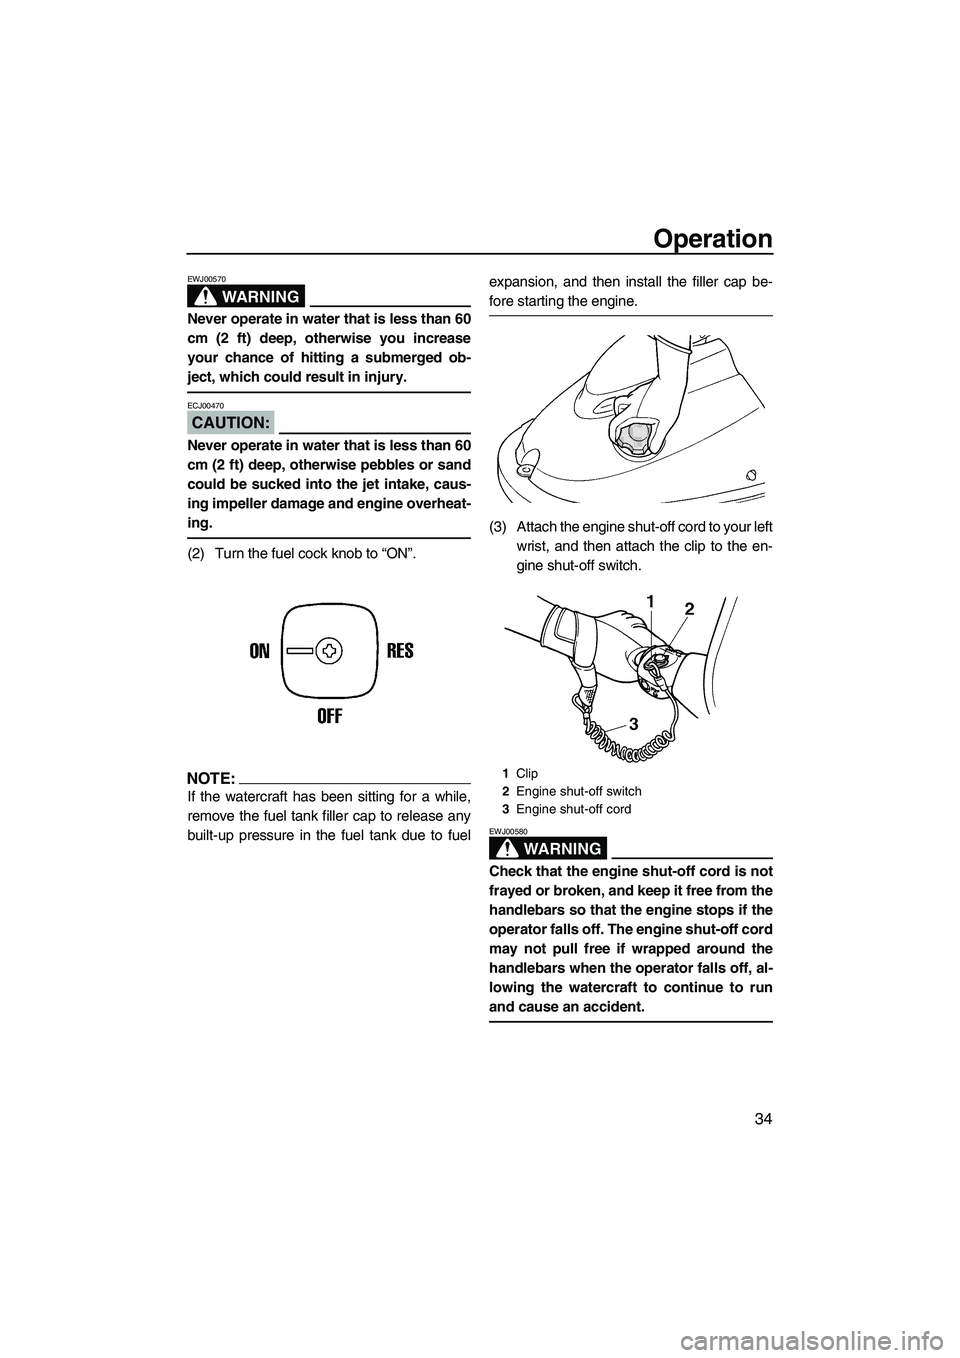 YAMAHA SUPERJET 2007 Service Manual Operation
34
WARNING
EWJ00570
Never operate in water that is less than 60
cm (2 ft) deep, otherwise you increase
your chance of hitting a submerged ob-
ject, which could result in injury.
CAUTION:
ECJ